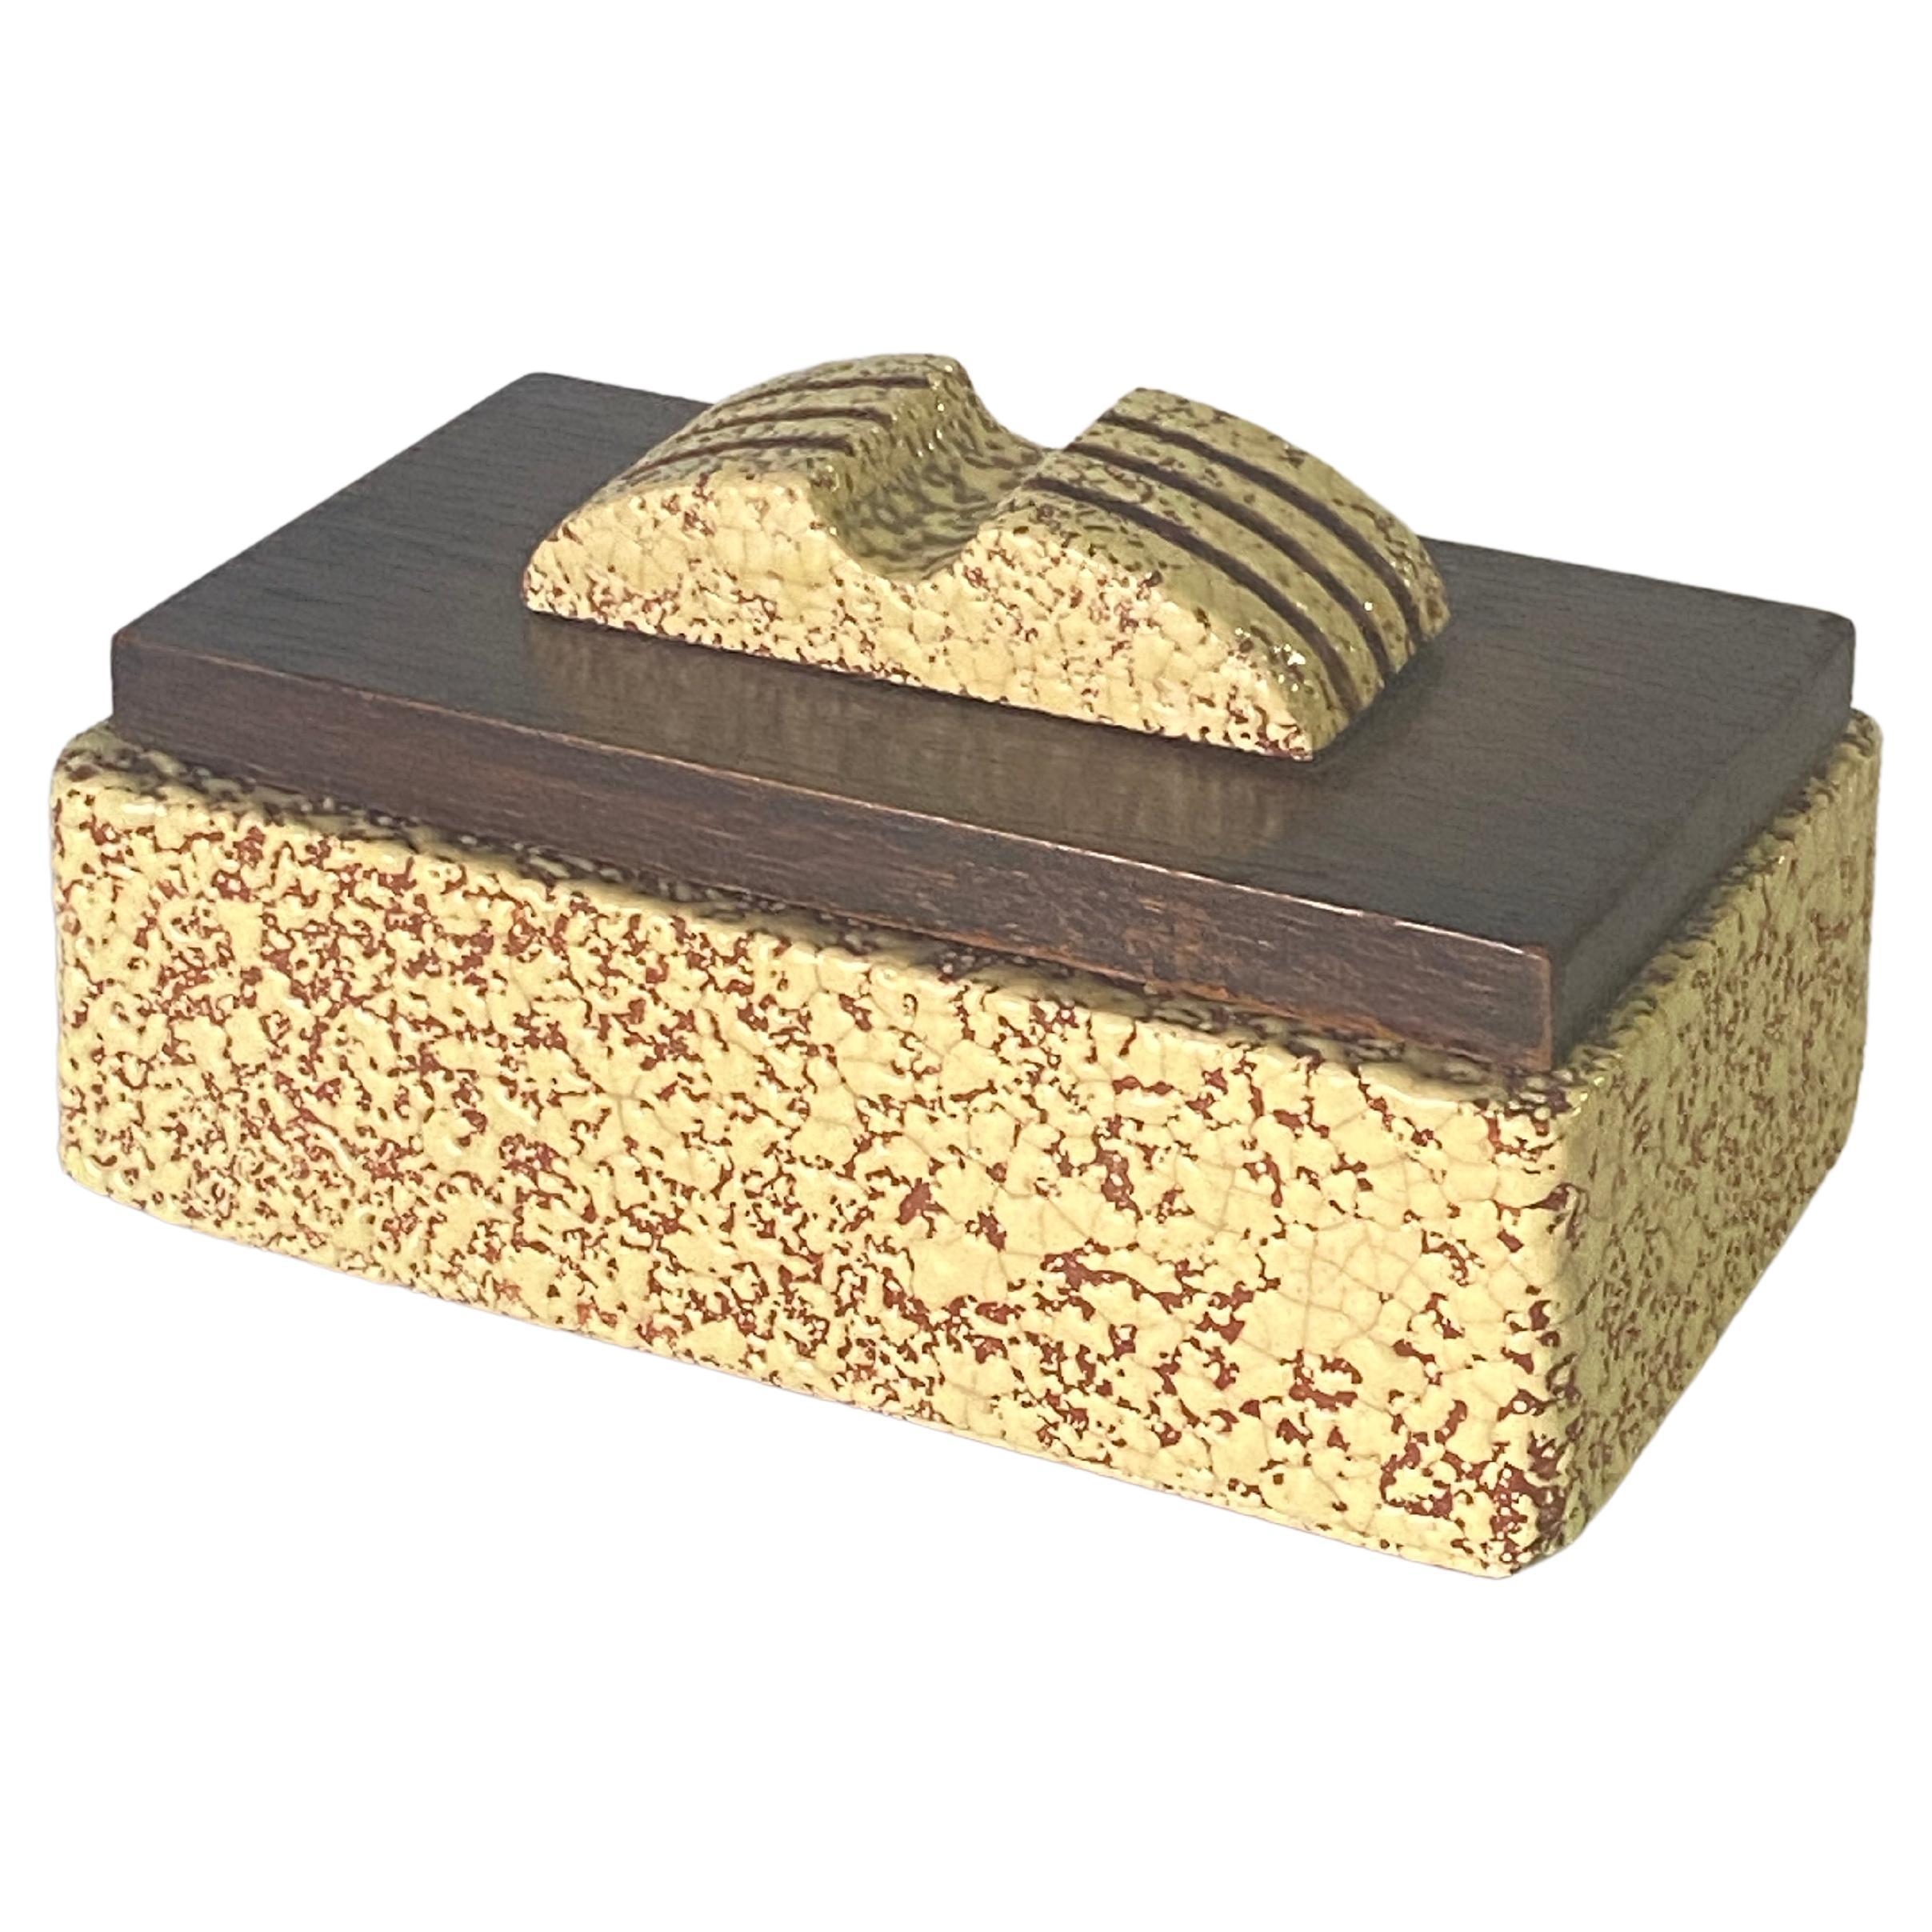 Decorative Box in Wood and Ceramic, Art Deco Period, Brown Color, France, 1940